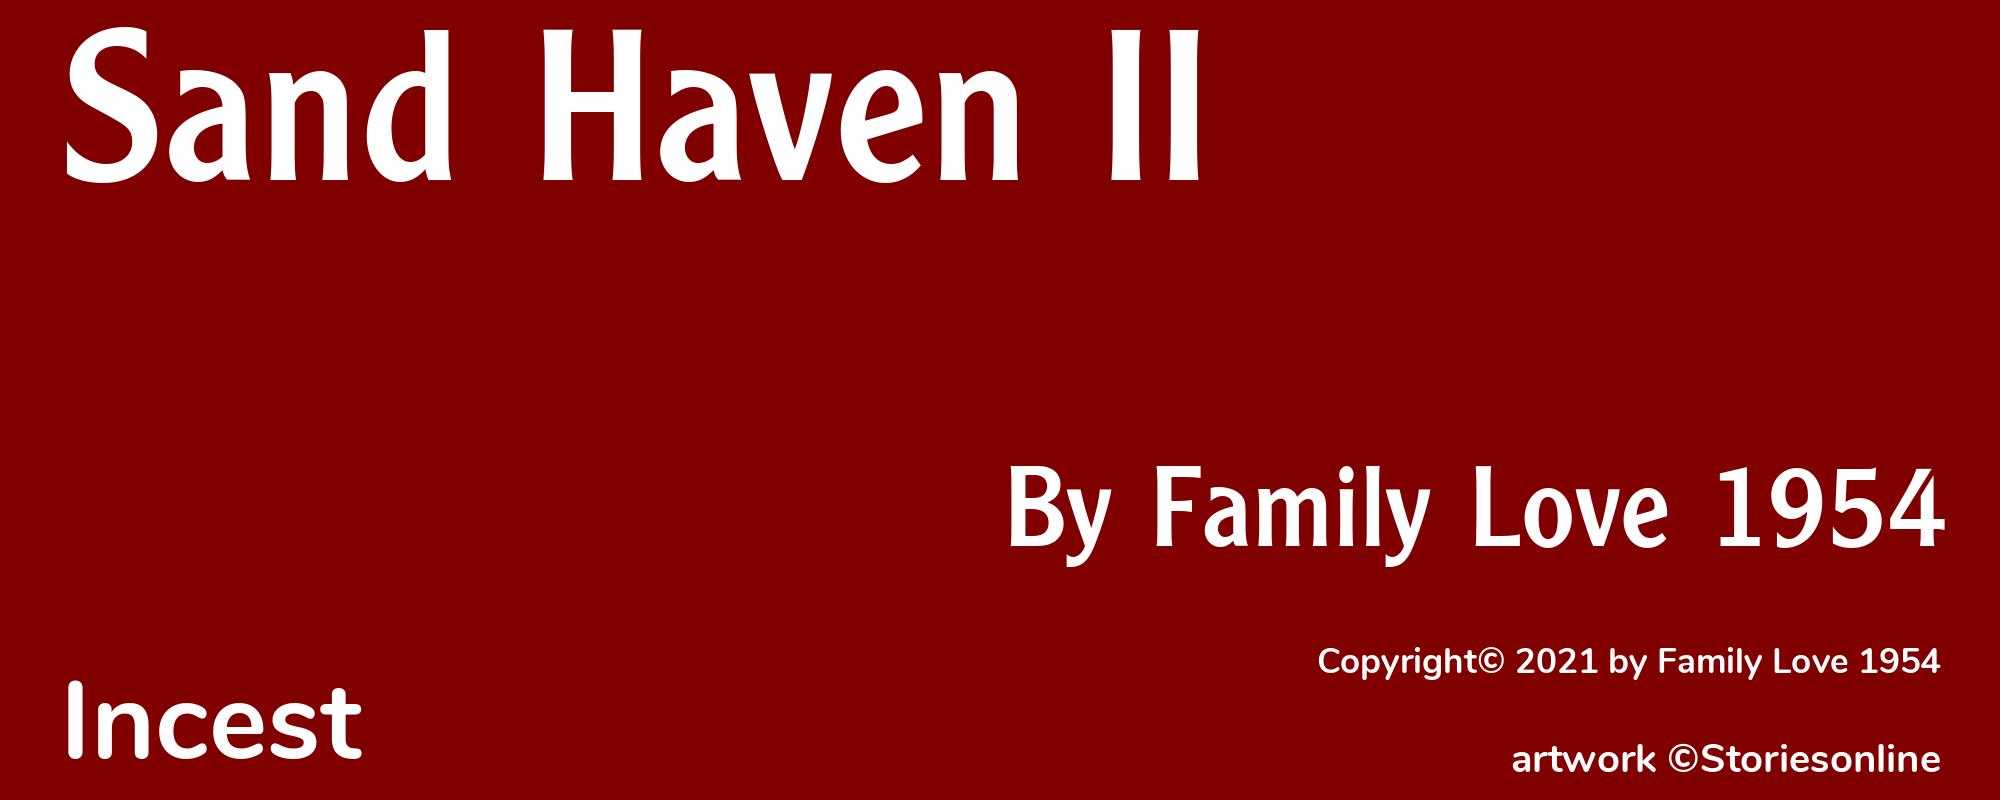 Sand Haven II - Cover